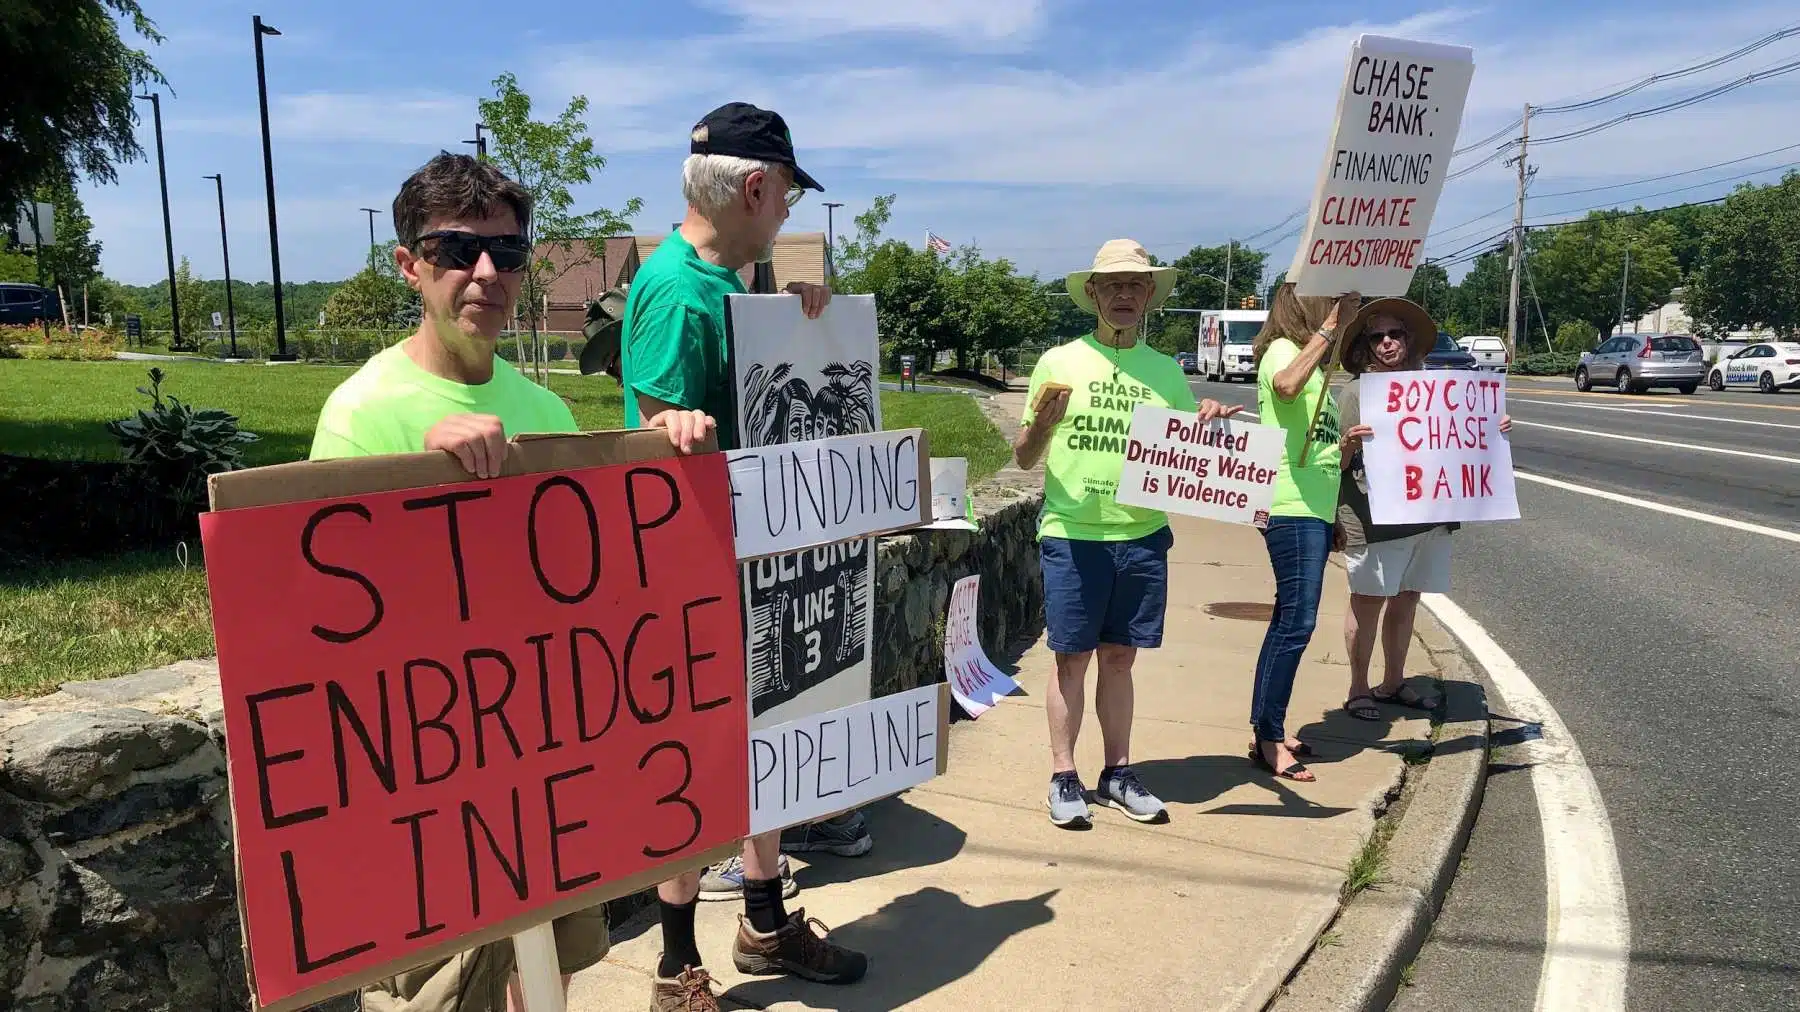 Rhode Island News: Climate Action Rhode Island brings Chase Bank protest to Smithfield